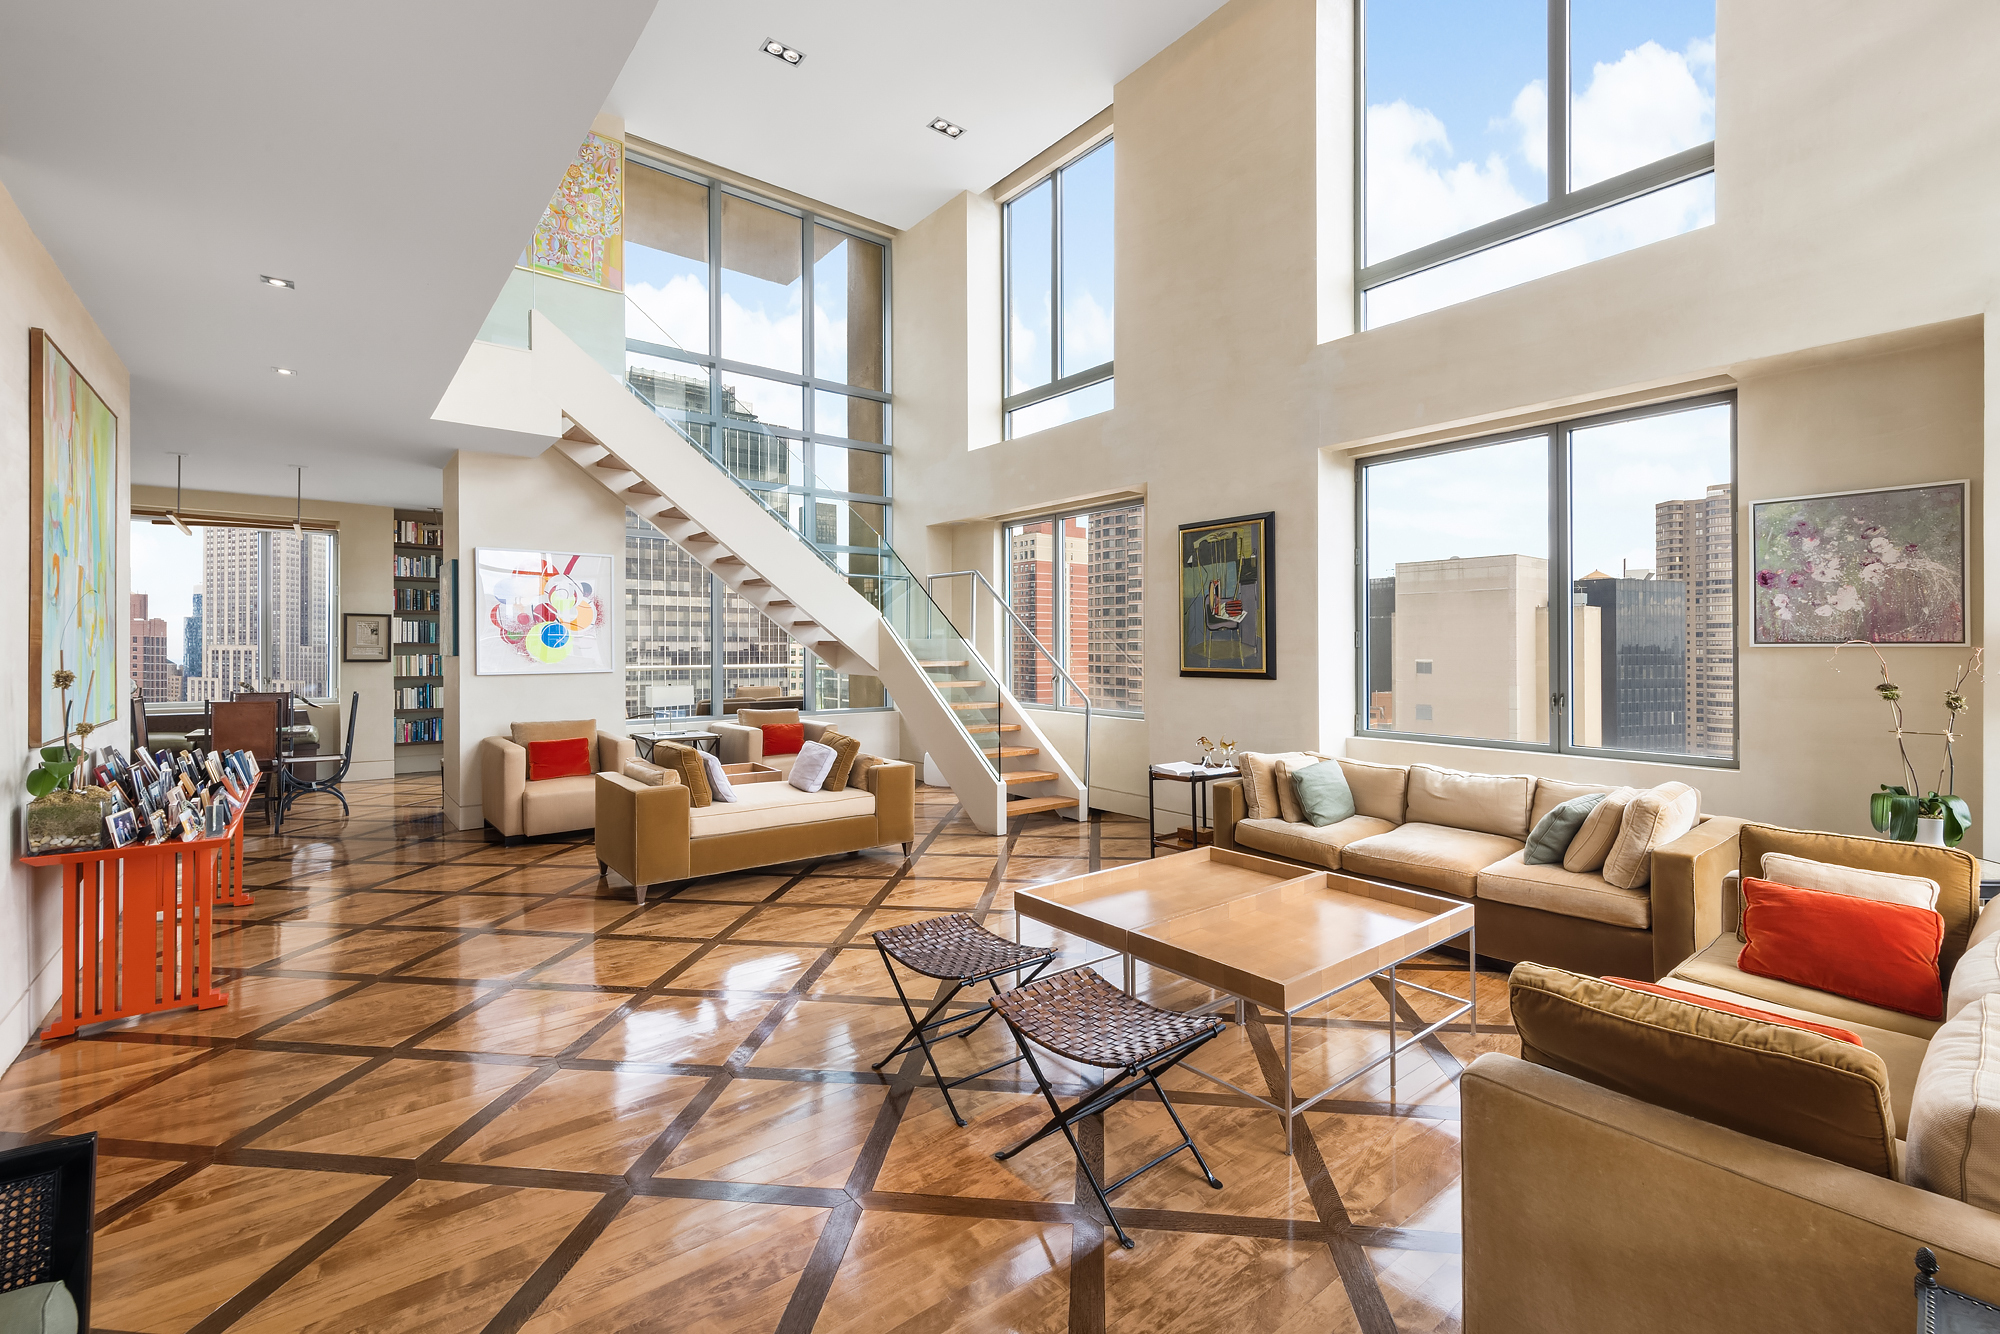 556 3rd Avenue Phg, Murray Hill, Midtown East, NYC - 4 Bedrooms  
5 Bathrooms  
7 Rooms - 